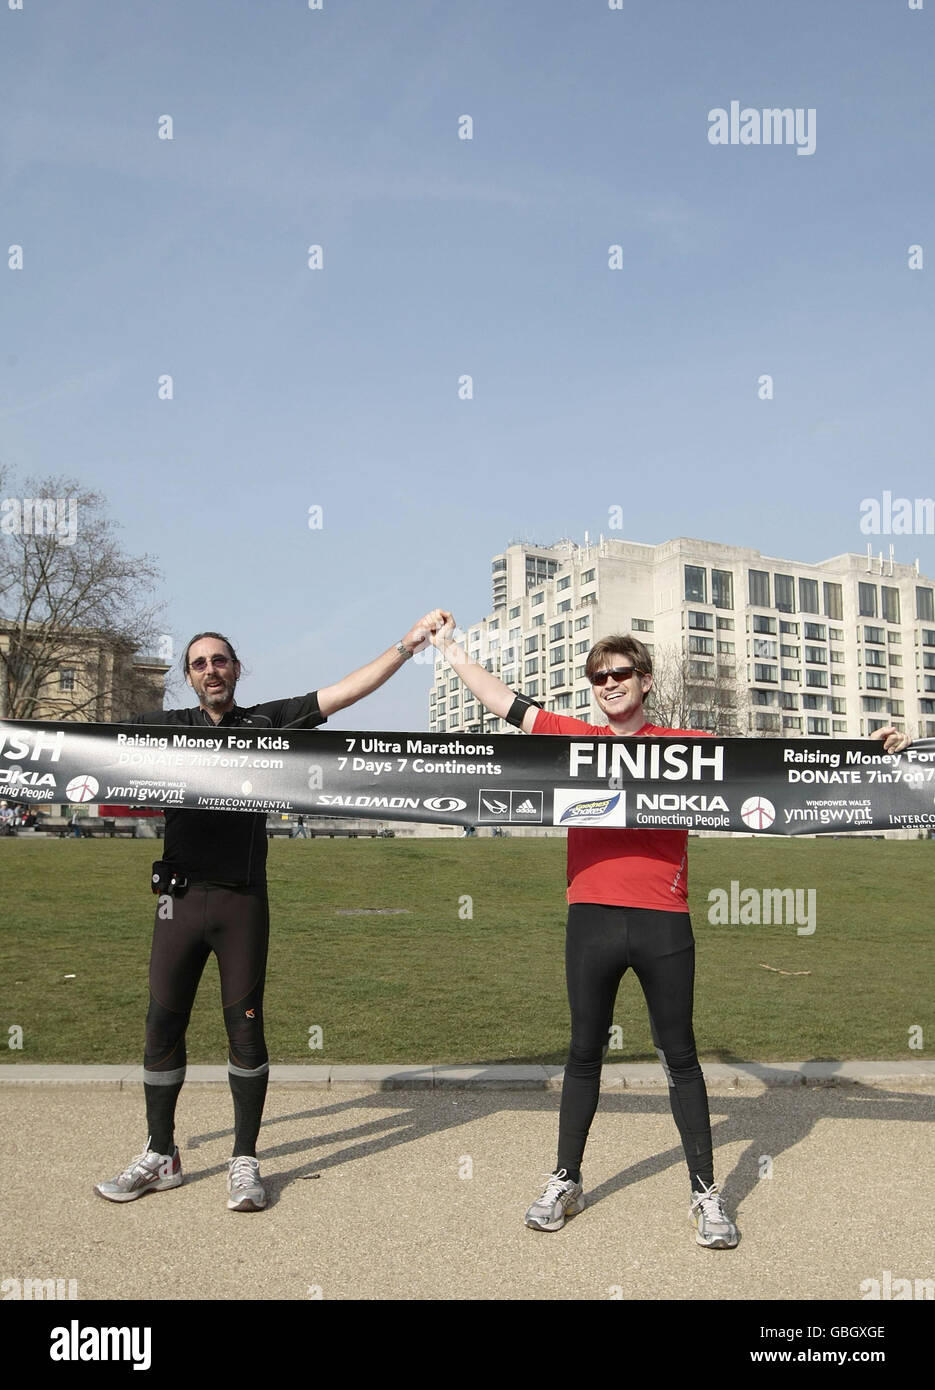 Jack Jones (red top) and his American team mate Chris Cuddihy celebrate in  Hyde Park after completing the 777 Ultra Marathon Challenge. The British  runner set a world record for completing seven